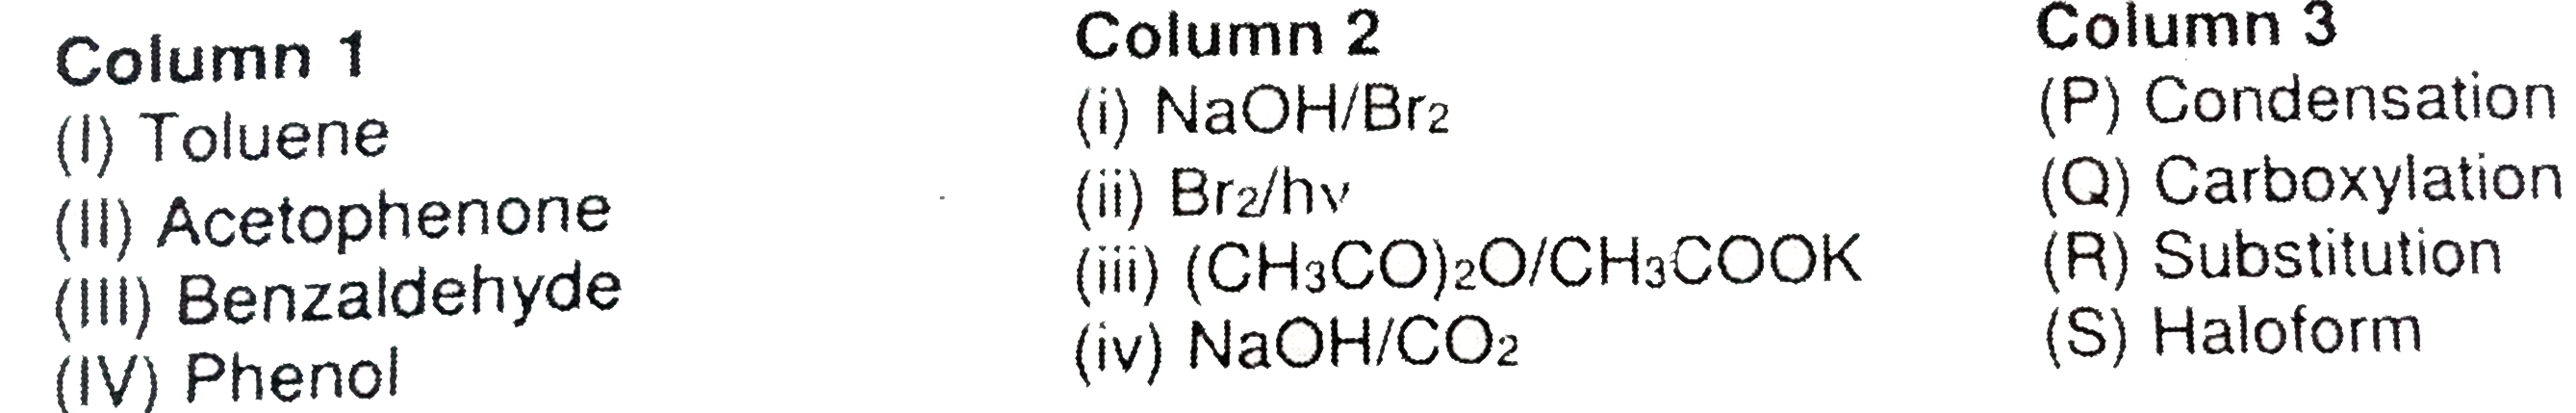 Column 1,2 and 3 contain starting materials, reaction conditions, and type of reactions, respectively       For the synthesis of benzoic acid, the only CORRECT combination is